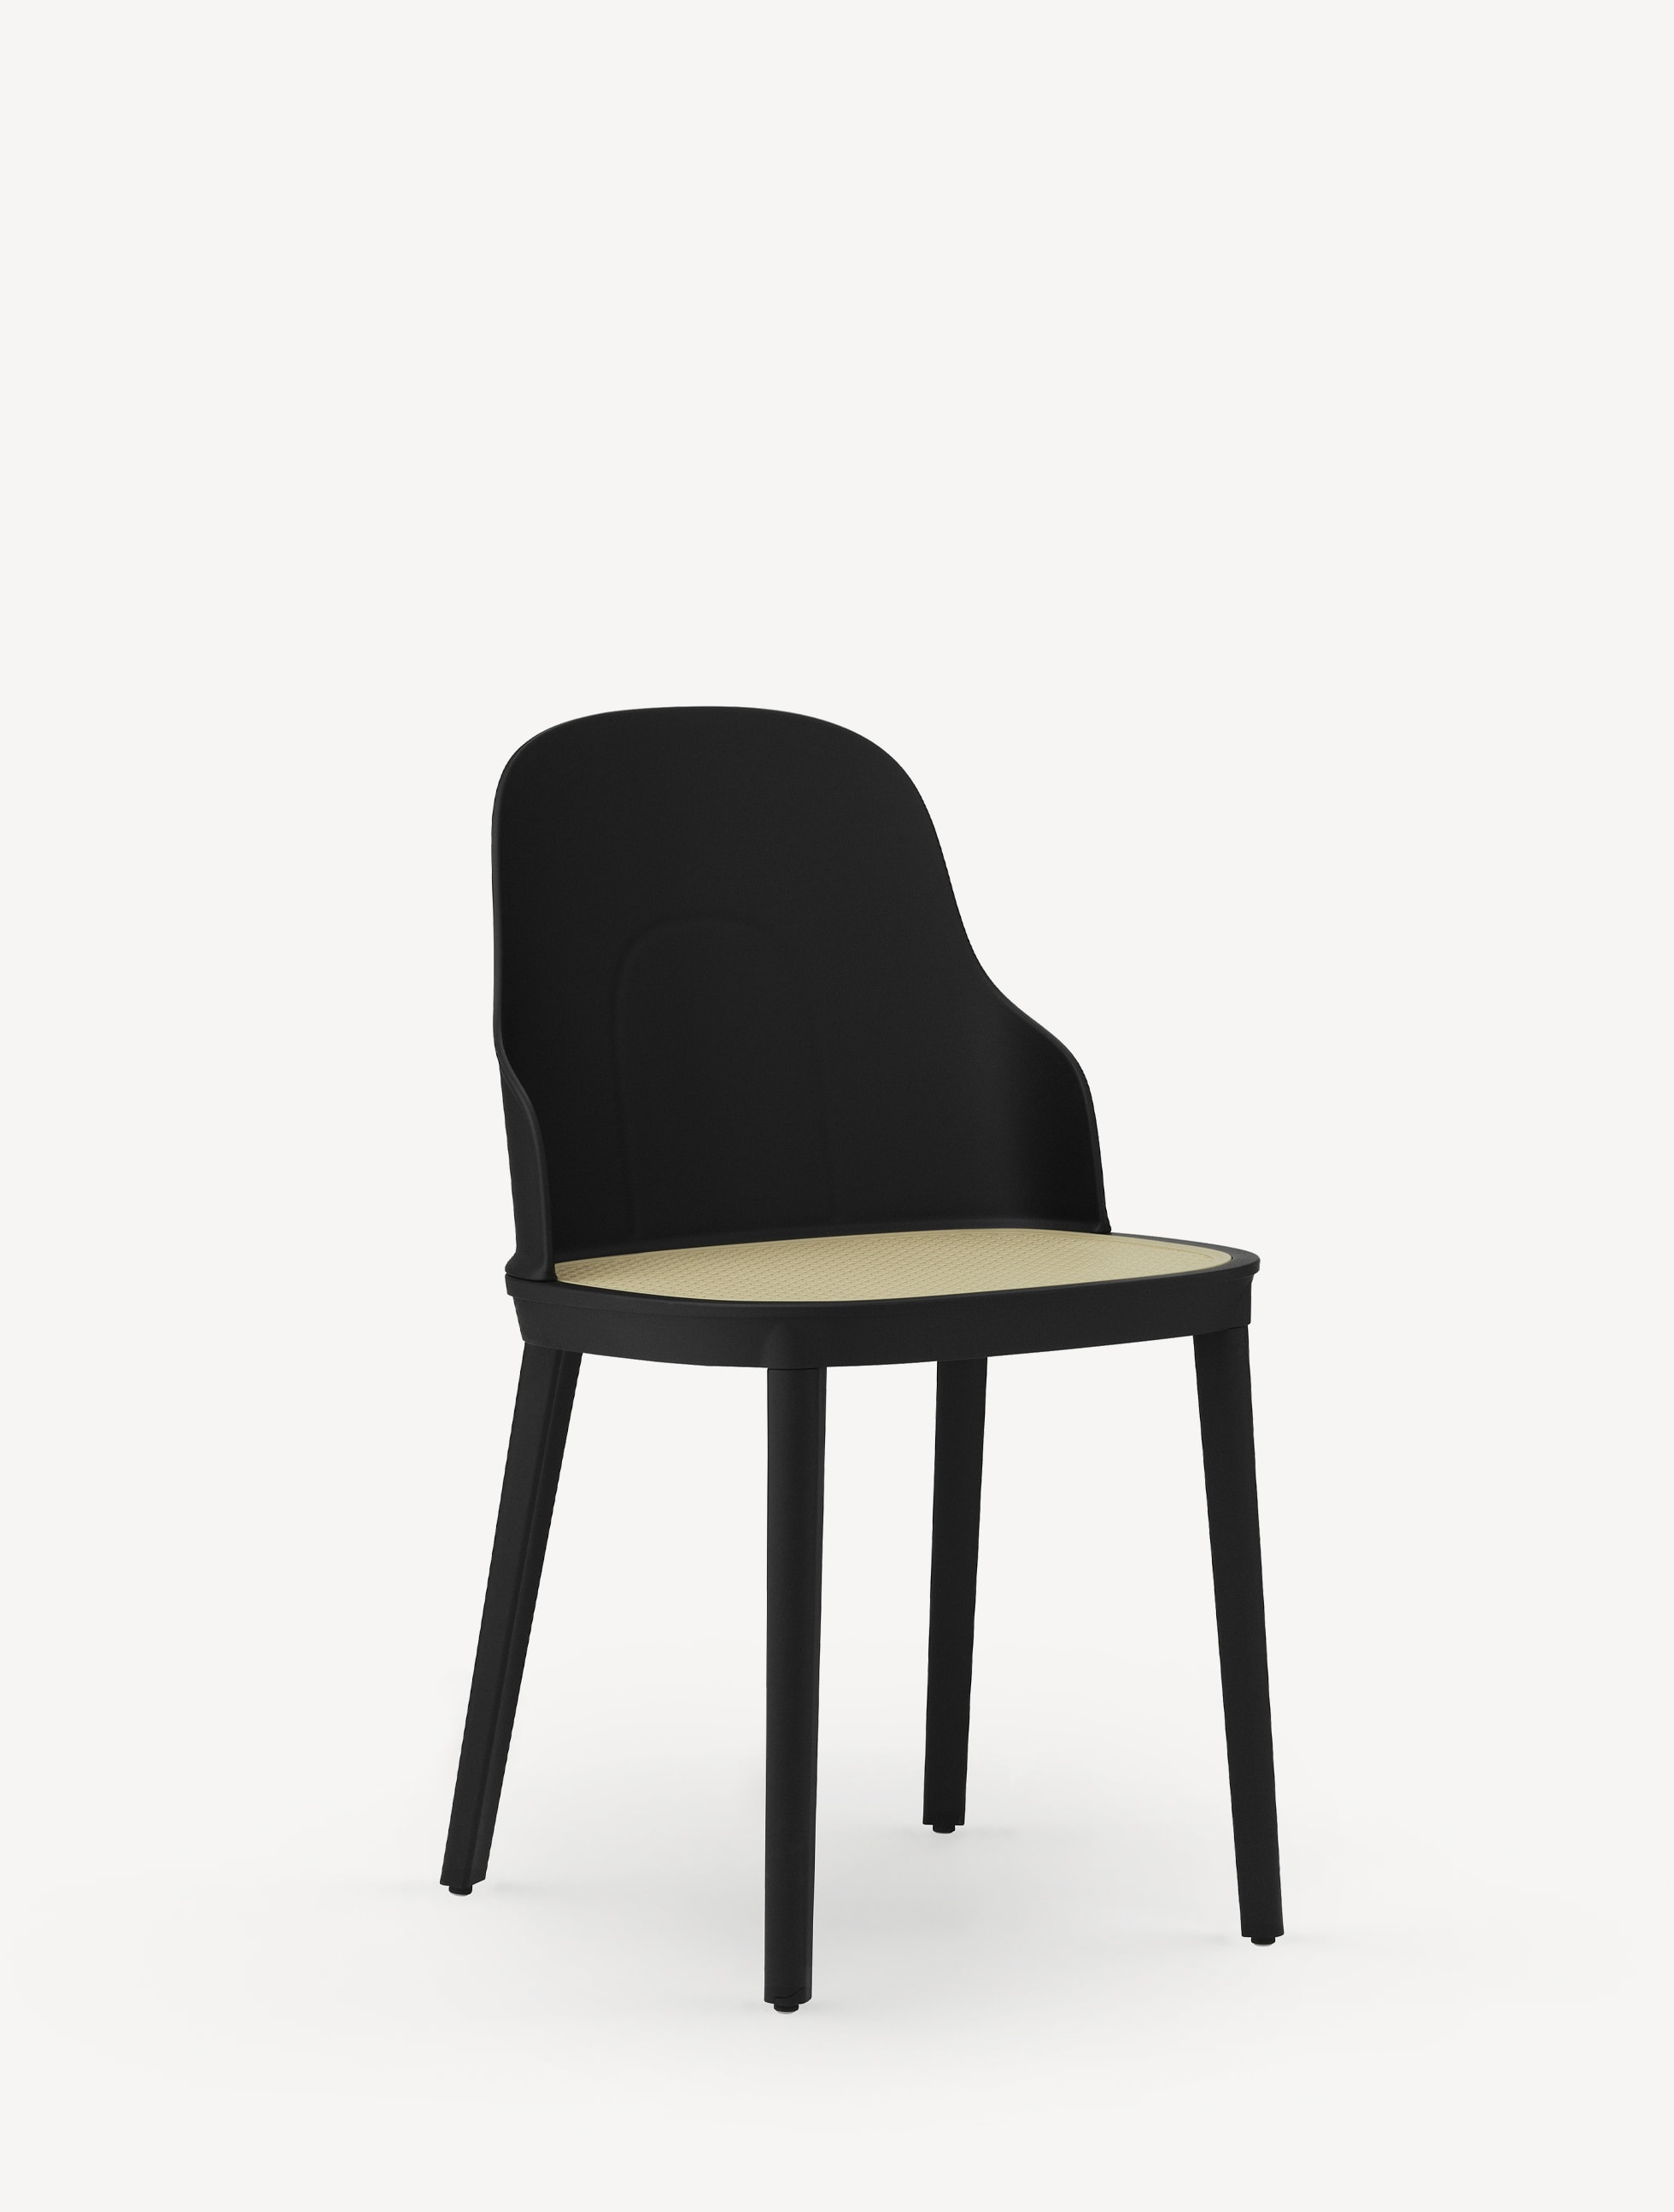 Three-quarter view of the Normann Copenhagen Allez Chair with molded wicker seat and black base and shell.